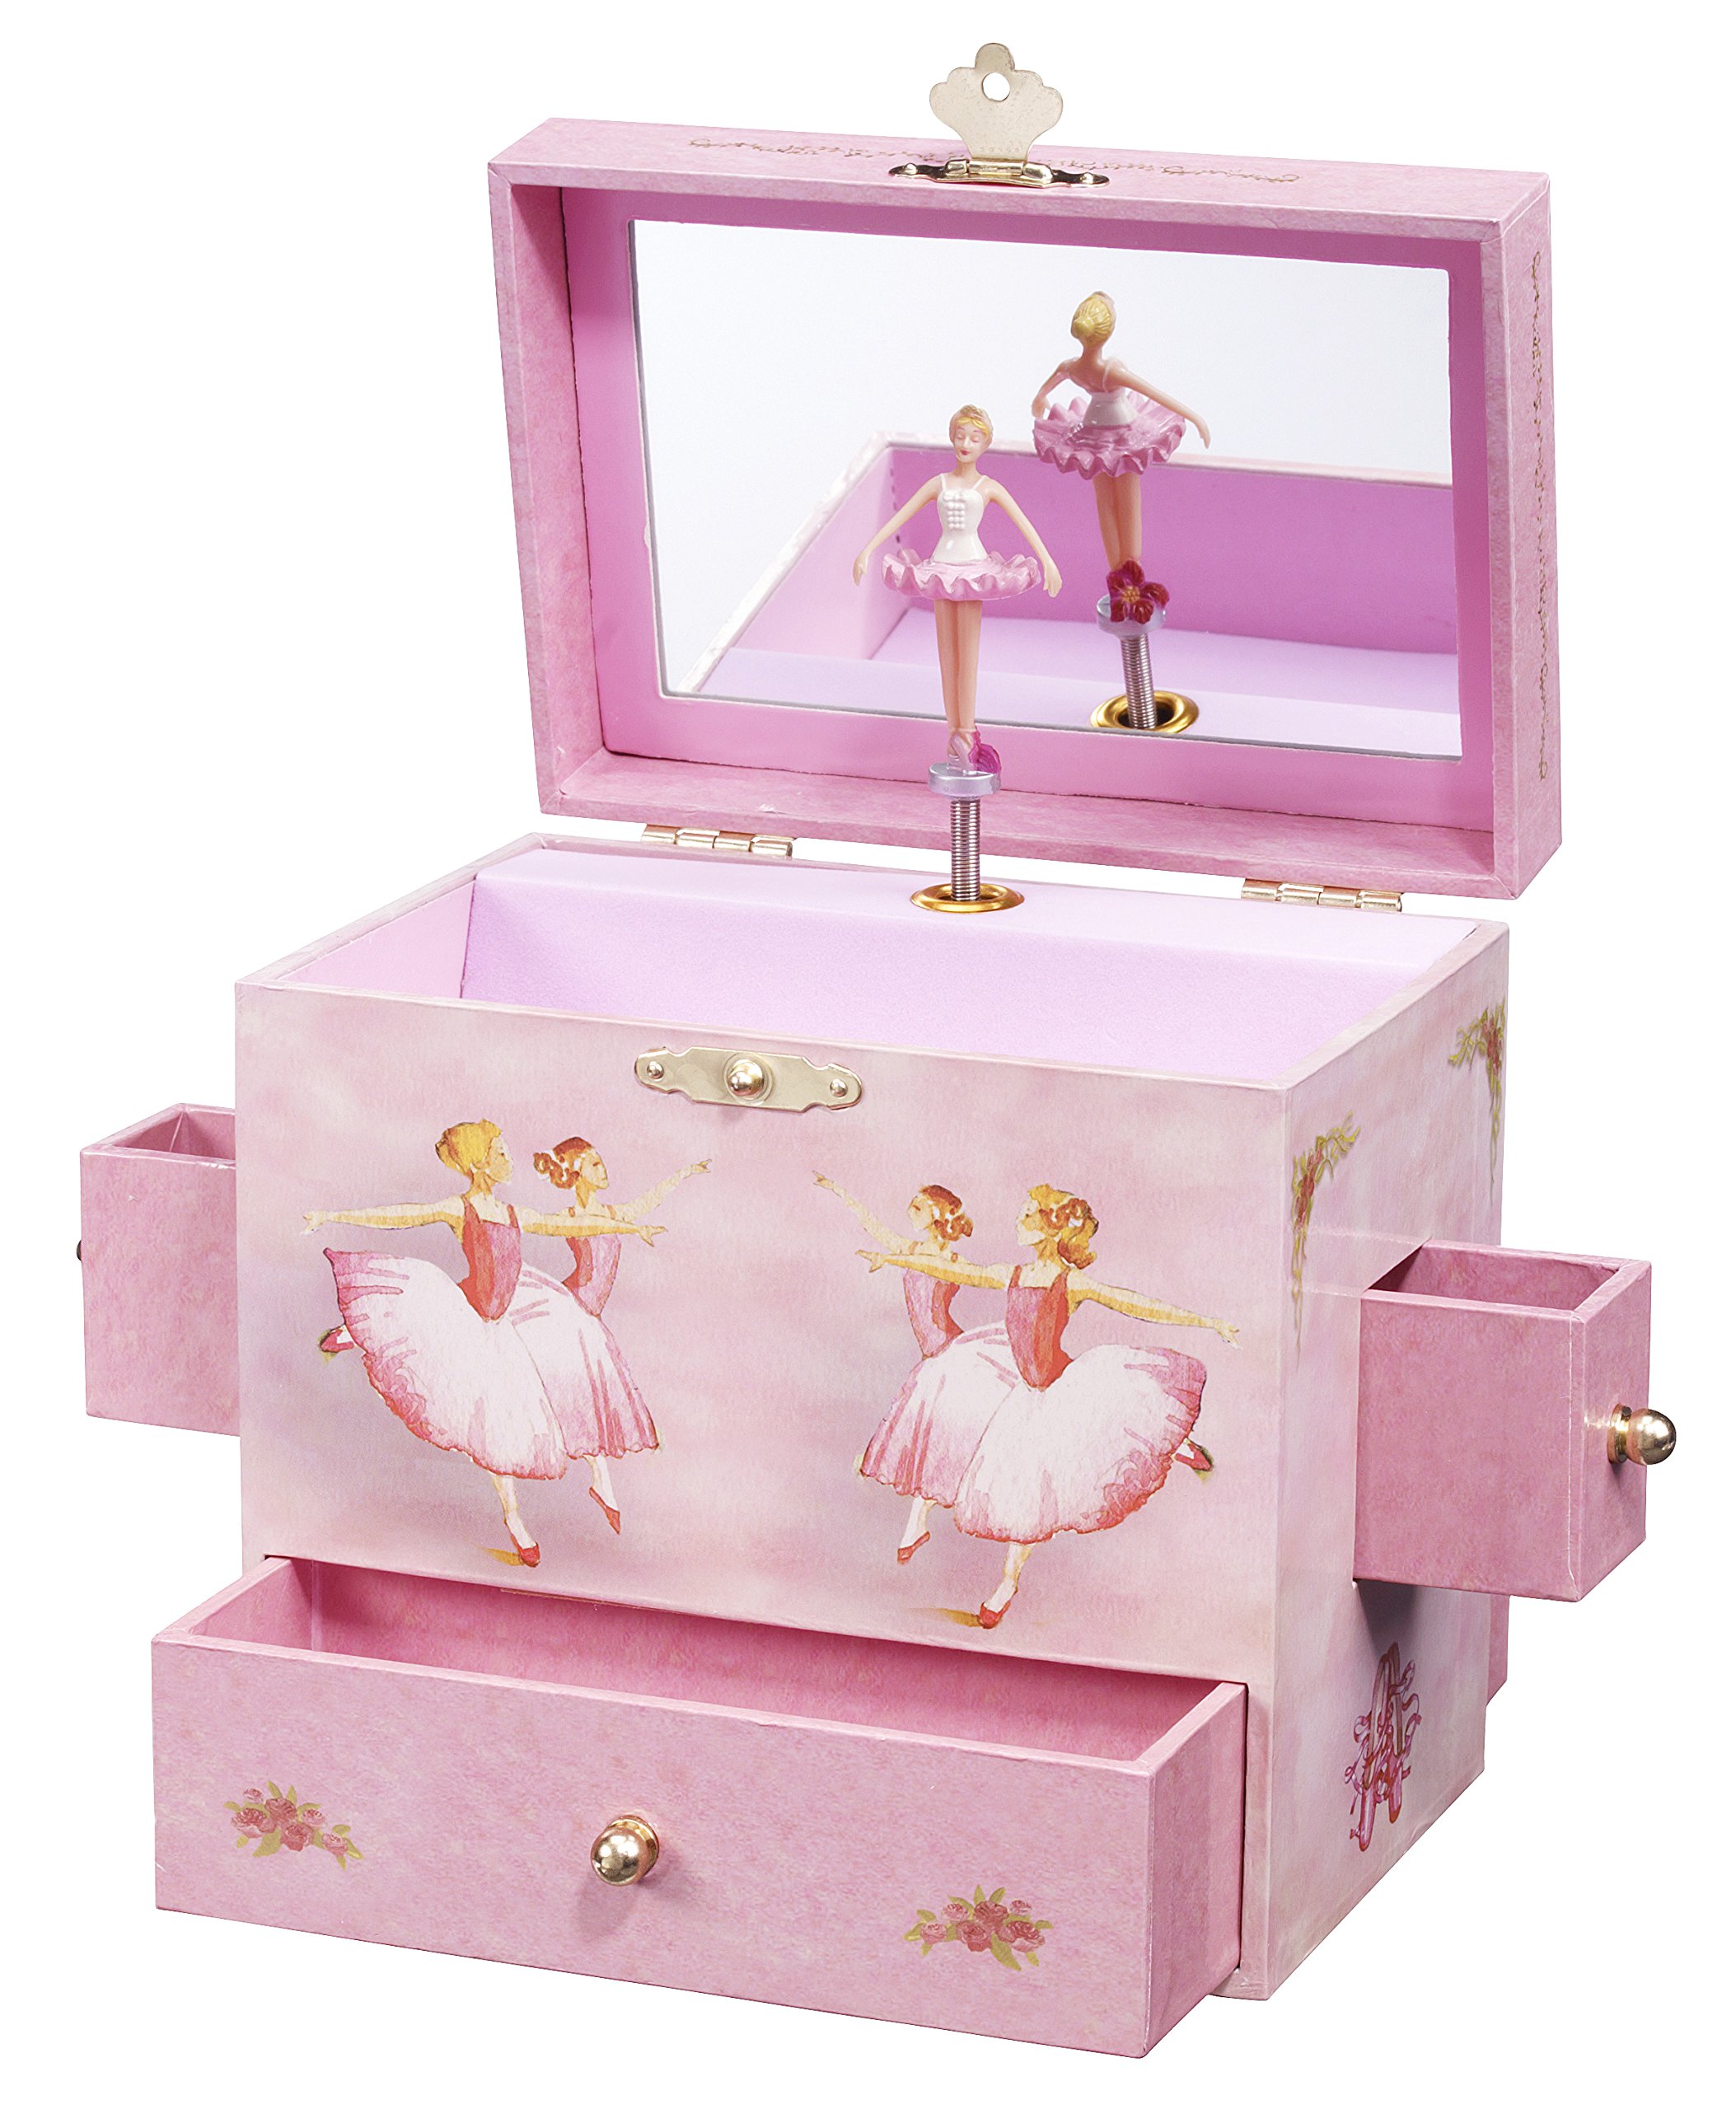 Book Cover Enchantmints Jewelry Box for Girls & Kids Jewelry Box for Little Girls Birthday Gifts, With Spinning Ballerina and 4 Drawers Musical Jewelry Boxes With Swan Lake Theme